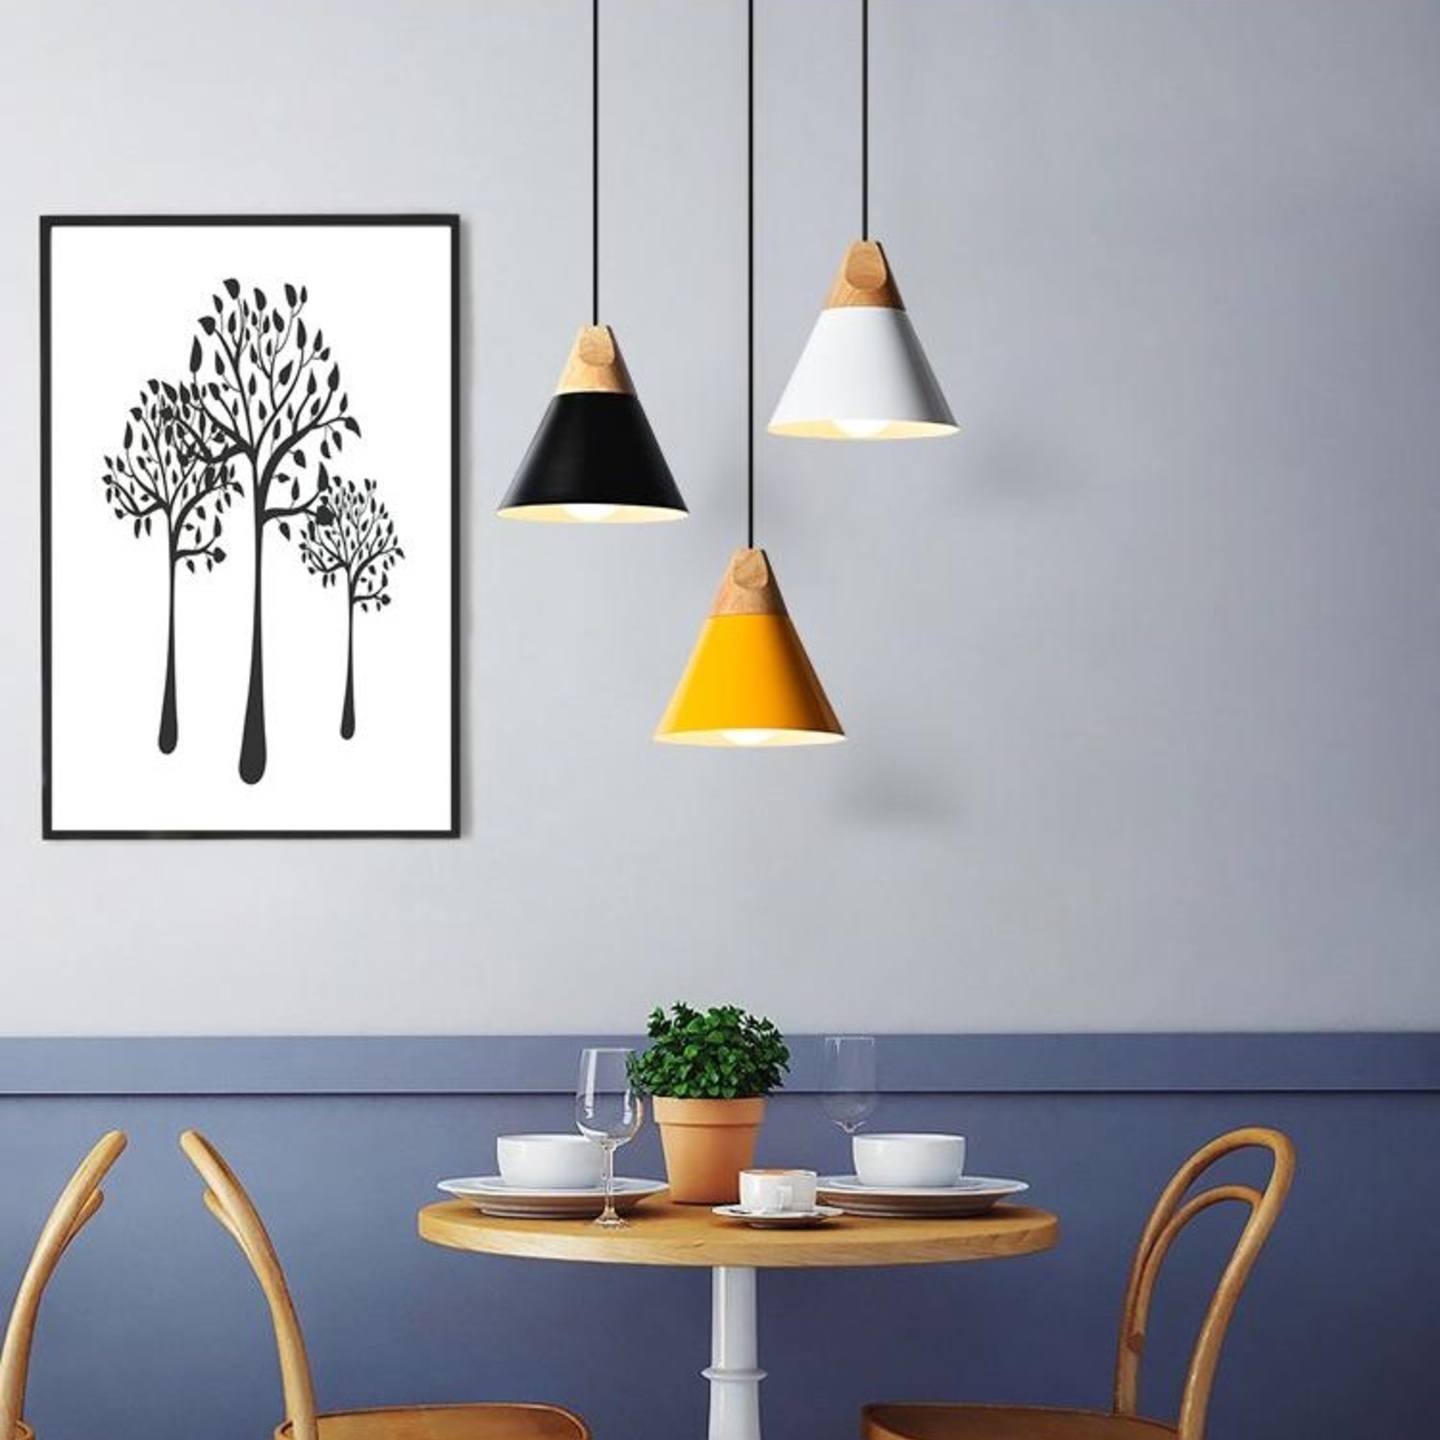 Cone with Wood Top Pendant Light